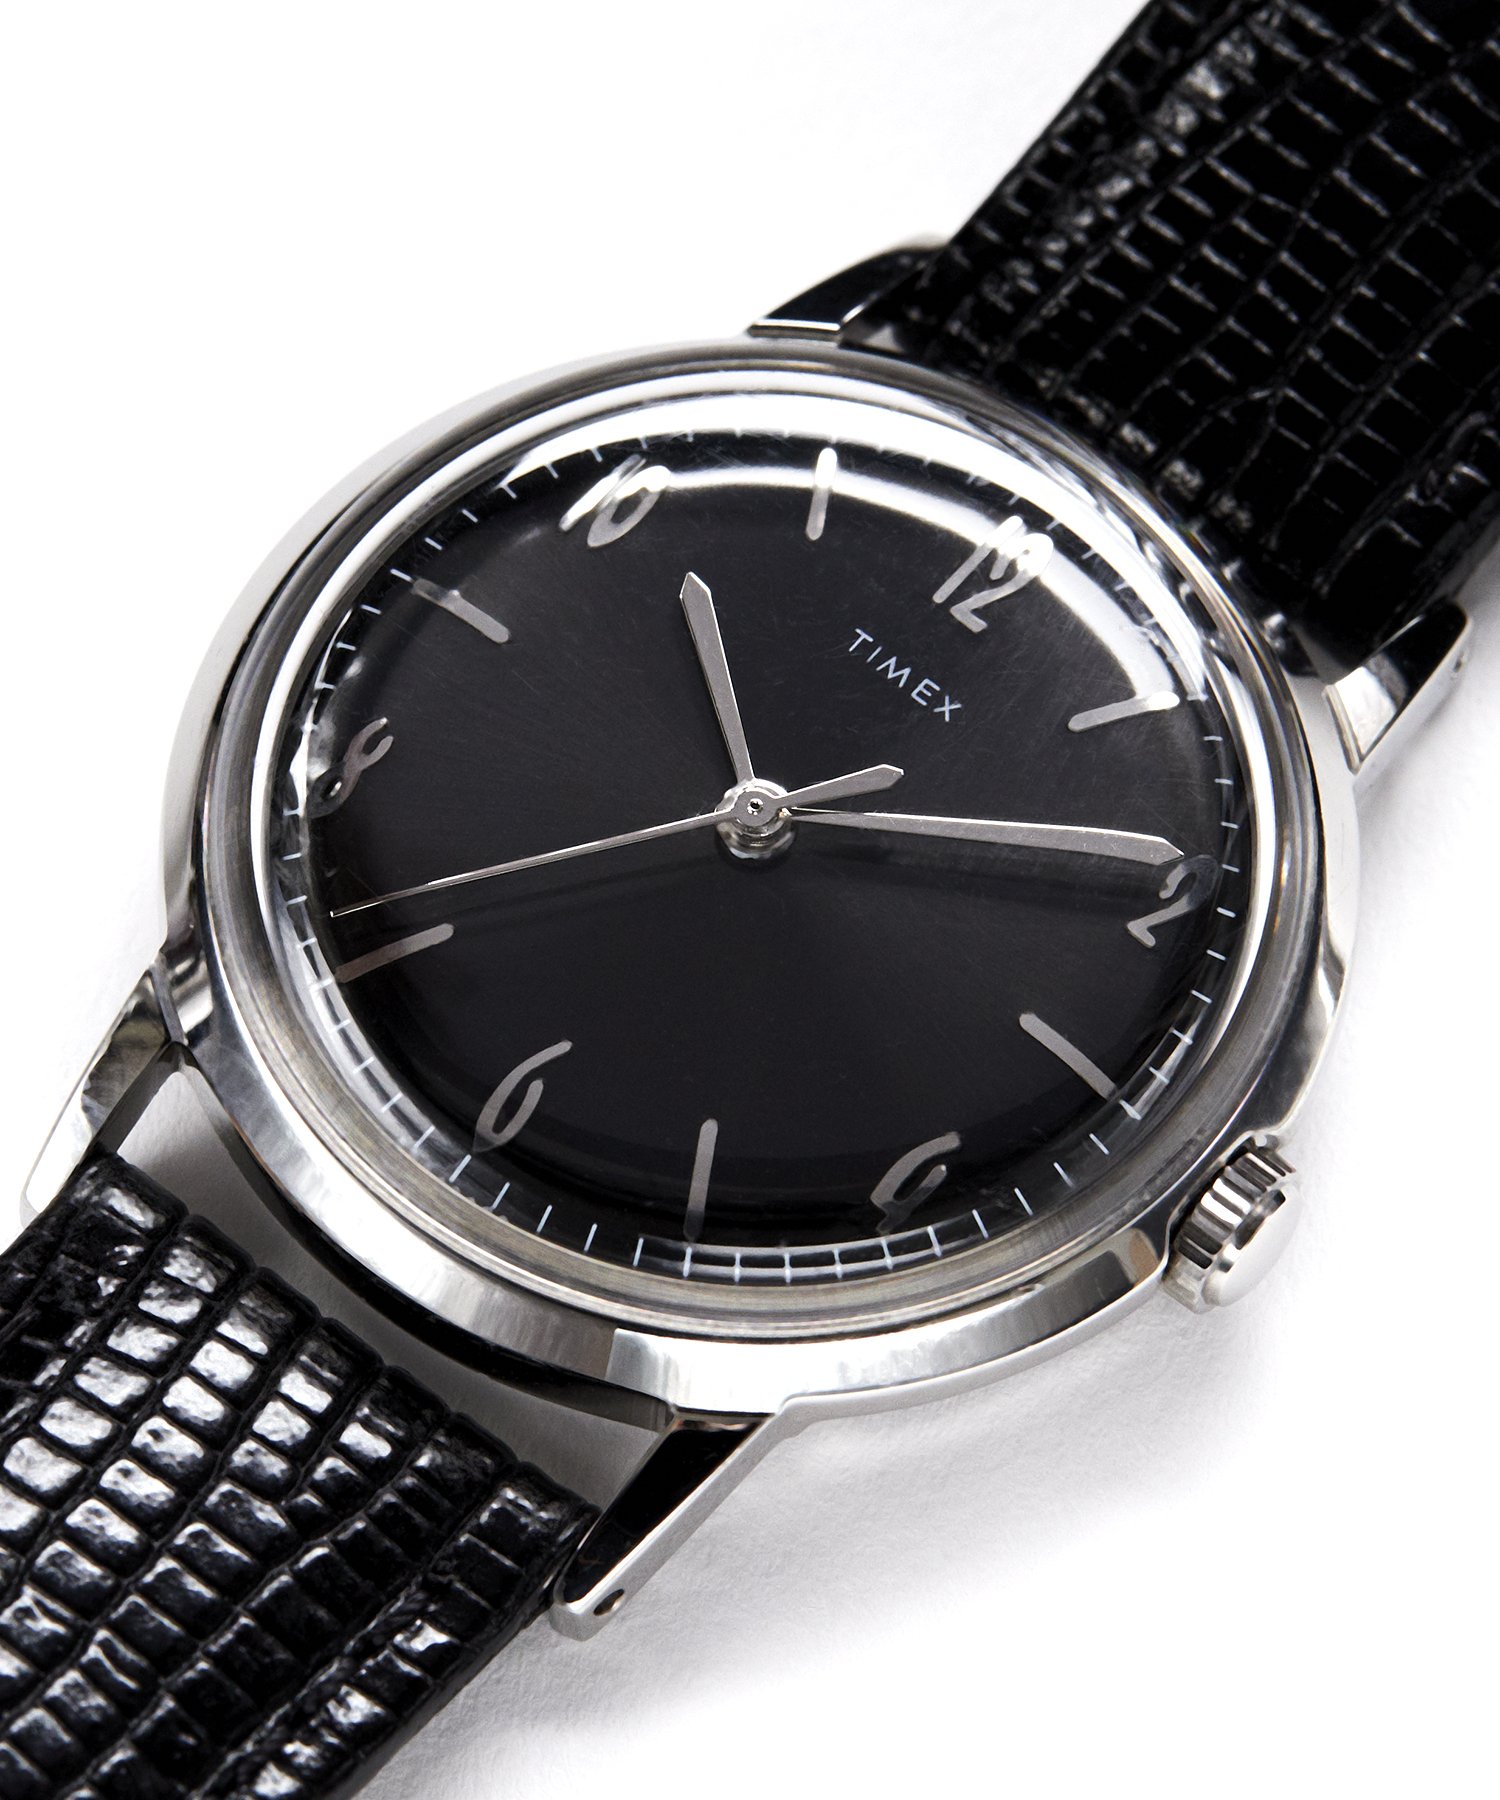 The pointy end of the Timex revival, a 